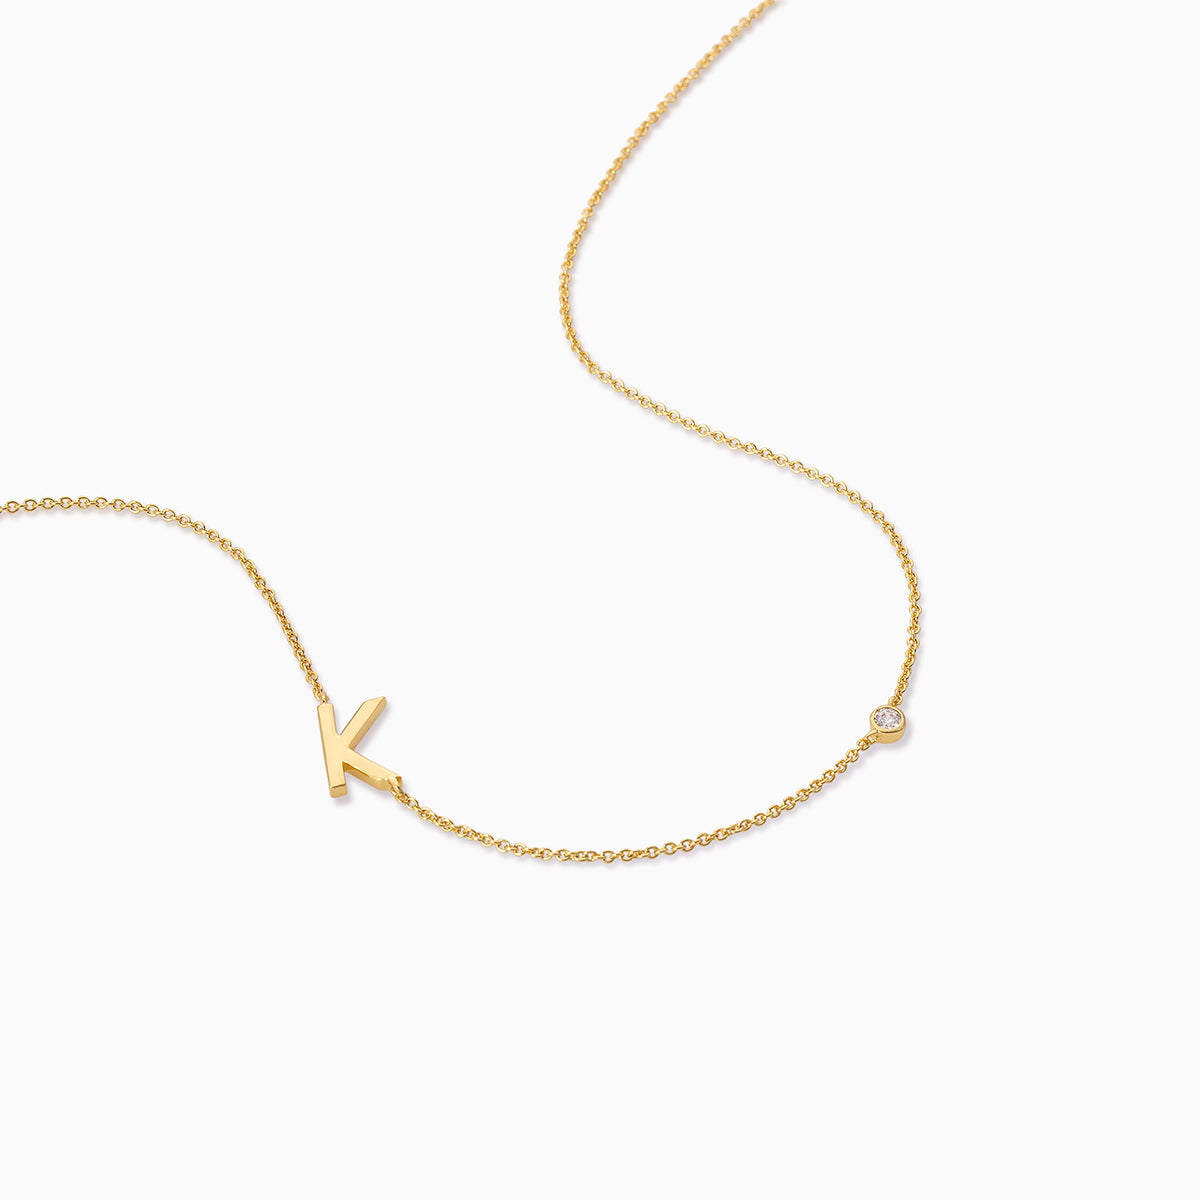 Personalized Touch Necklace | Gold A Gold B Gold C Gold D Gold E Gold G Gold H Gold J Gold K Gold L Gold M Gold N Gold P Gold R Gold S Gold T Gold V | Product Detail Image | Uncommon James